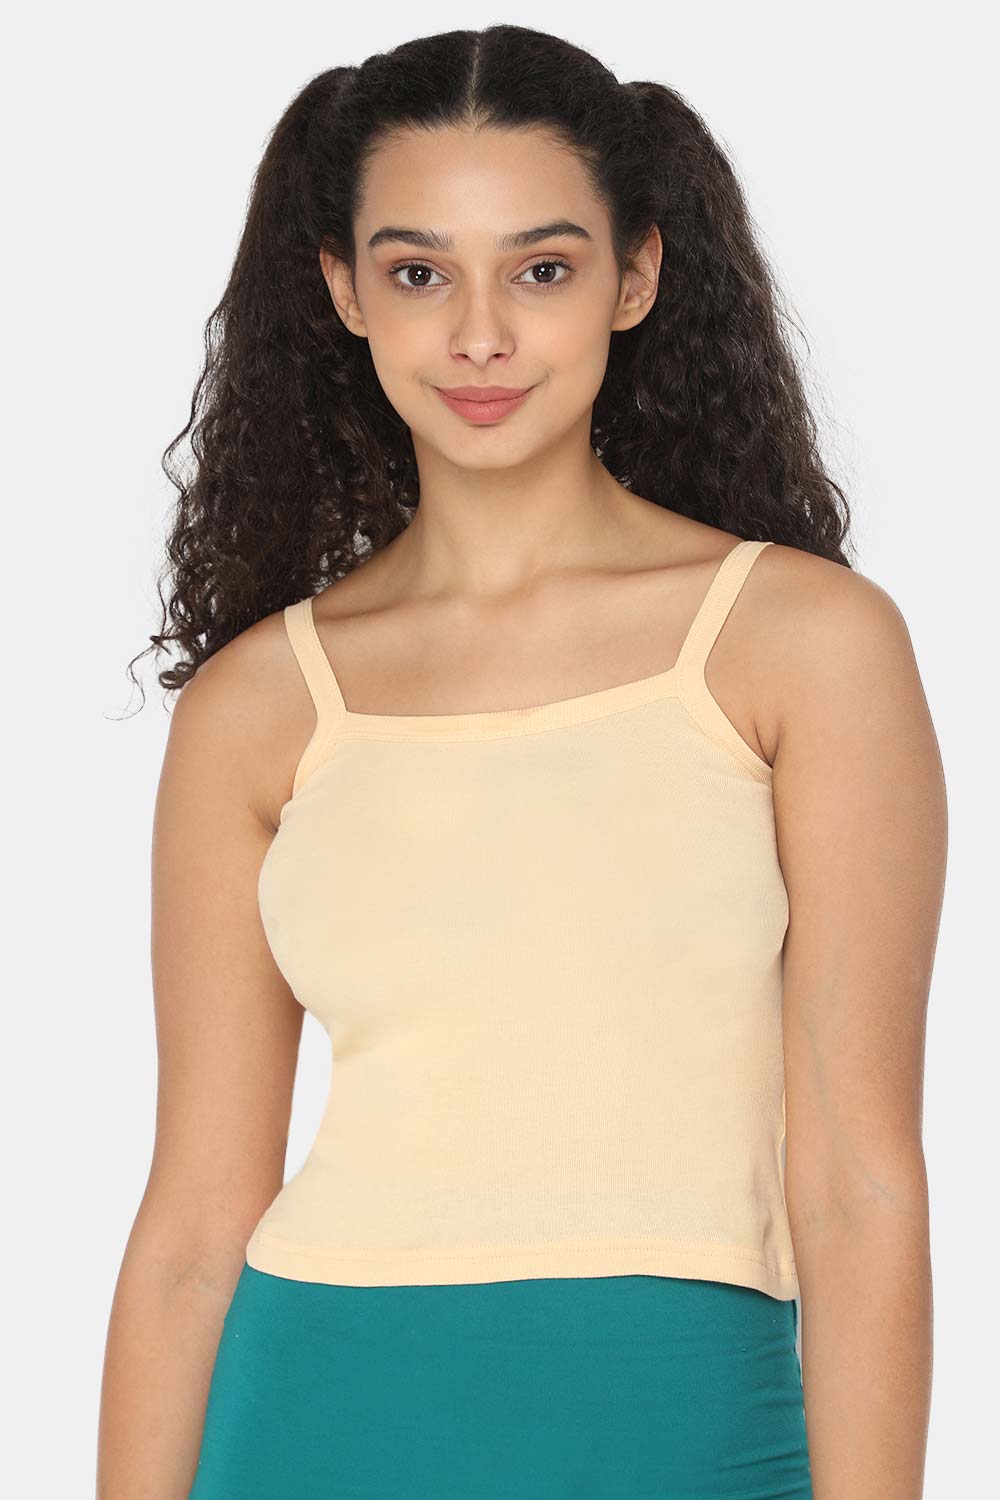 Intimacy Camisole-Slip Special Combo Pack - In01 - Pack of 3 - C53